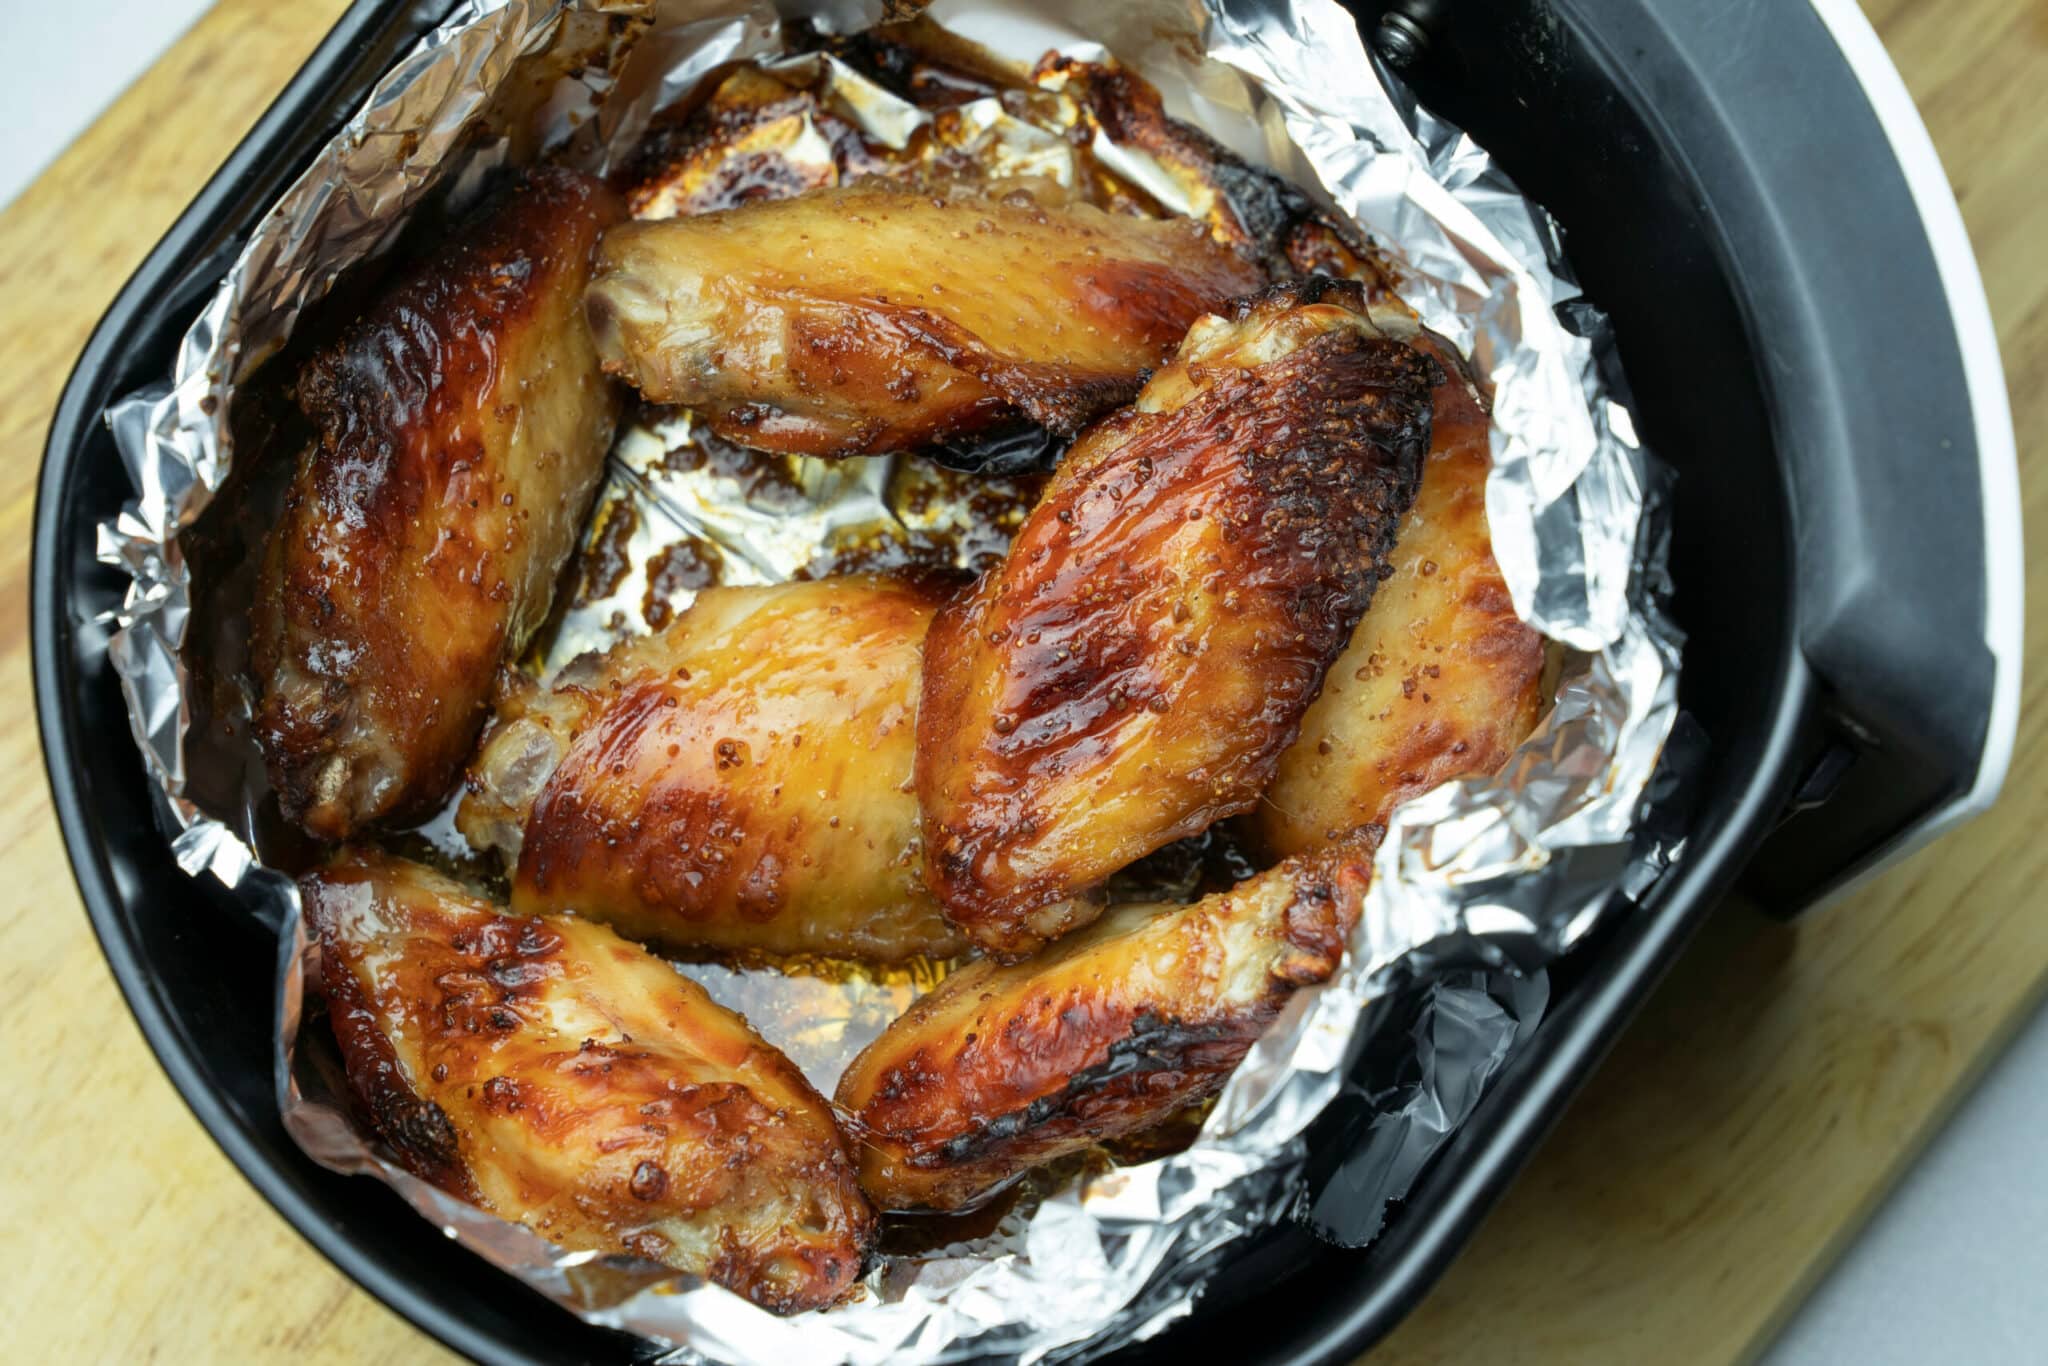 How To Use Aluminum Foil In An Air Fryer